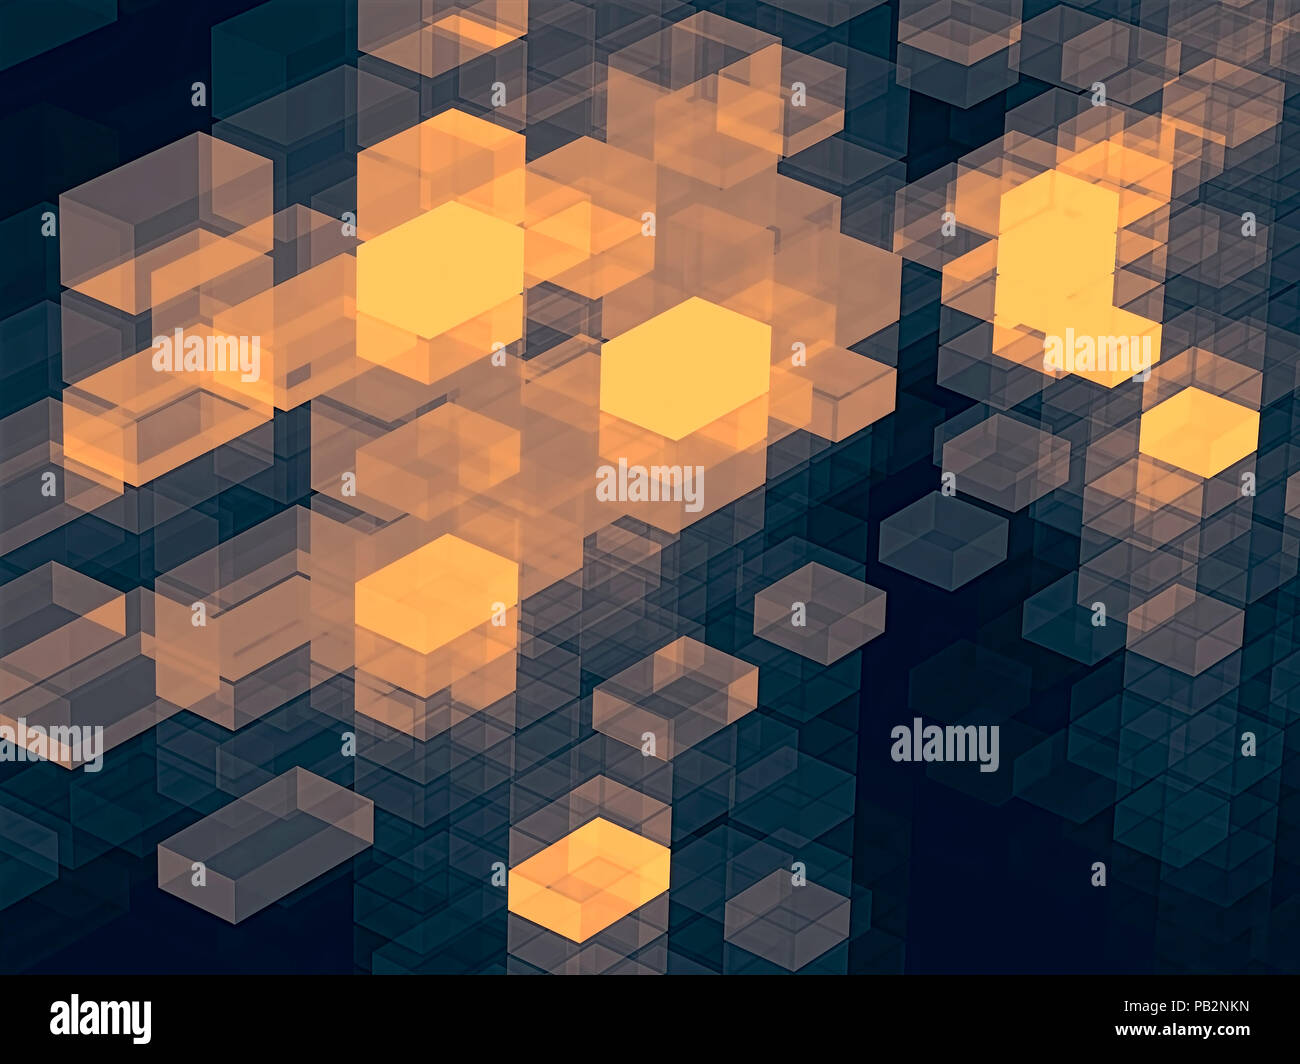 Cubes background - abstract digitally generated image Stock Photo